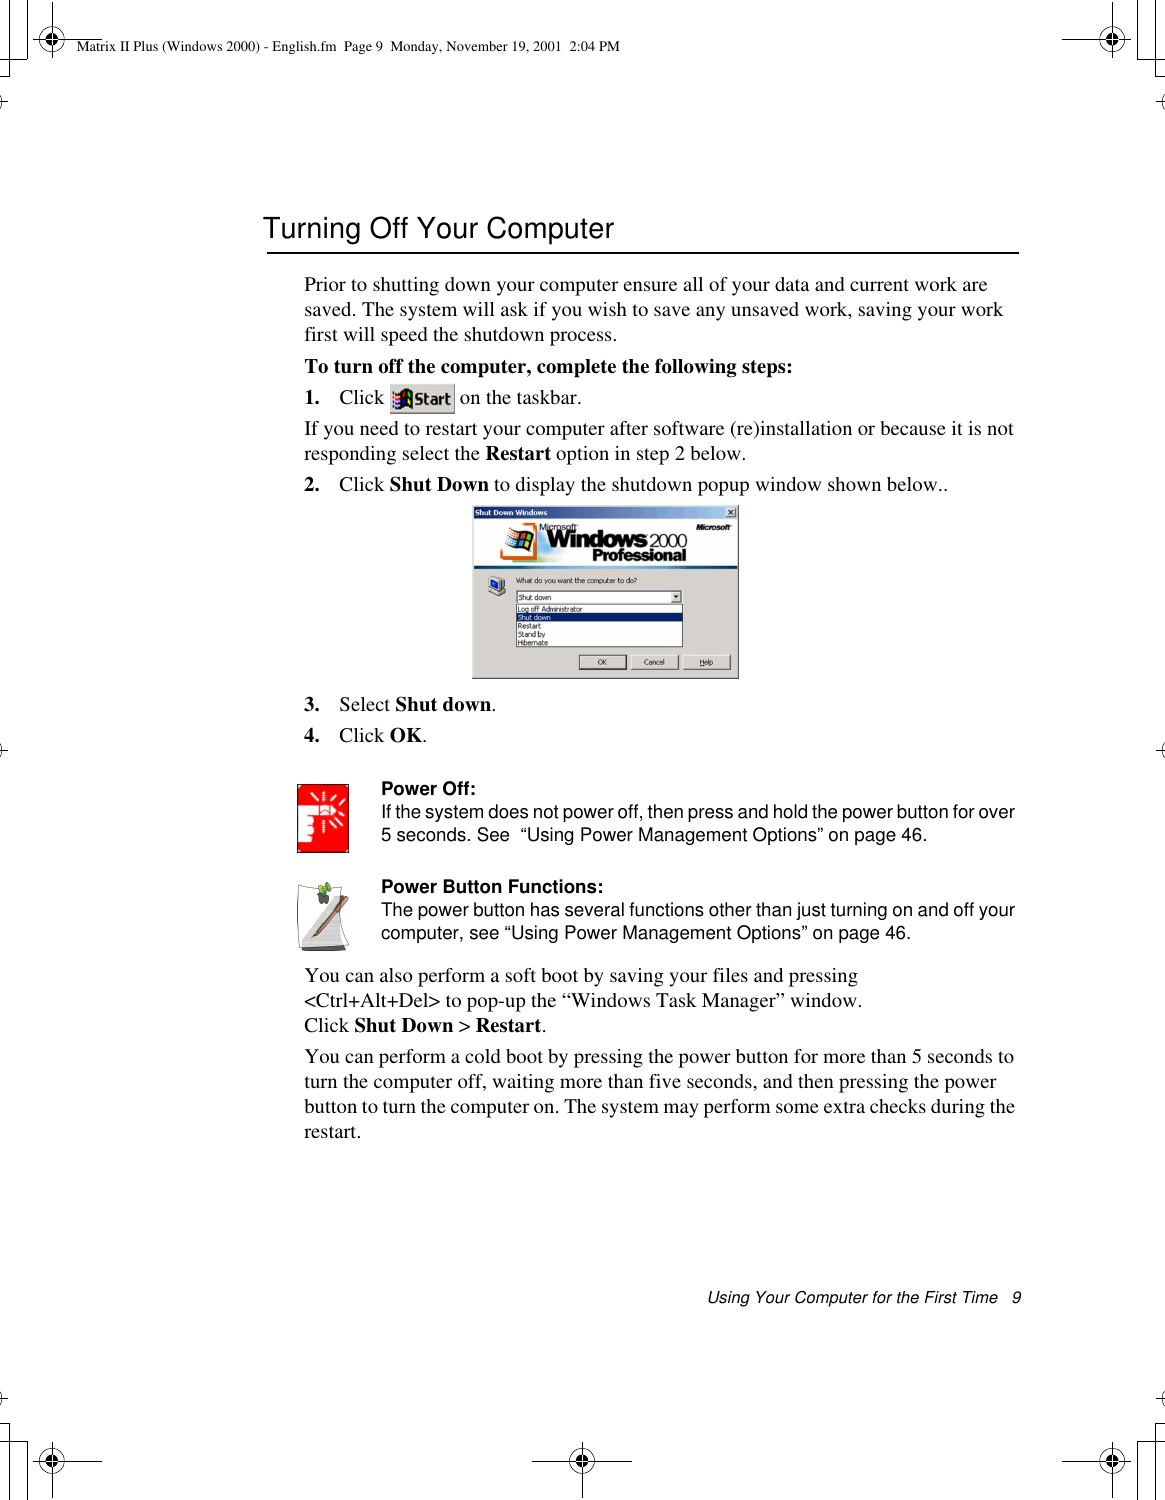 Using Your Computer for the First Time   9Turning Off Your ComputerPrior to shutting down your computer ensure all of your data and current work are saved. The system will ask if you wish to save any unsaved work, saving your work first will speed the shutdown process.To turn off the computer, complete the following steps:1. Click  on the taskbar.If you need to restart your computer after software (re)installation or because it is not responding select the Restart option in step 2 below.2. Click Shut Down to display the shutdown popup window shown below.. 3. Select Shut down.4. Click OK. Power Off:If the system does not power off, then press and hold the power button for over 5 seconds. See  “Using Power Management Options” on page 46.Power Button Functions:The power button has several functions other than just turning on and off your computer, see “Using Power Management Options” on page 46.You can also perform a soft boot by saving your files and pressing &lt;Ctrl+Alt+Del&gt; to pop-up the “Windows Task Manager” window. Click Shut Down &gt; Restart.You can perform a cold boot by pressing the power button for more than 5 seconds to turn the computer off, waiting more than five seconds, and then pressing the power button to turn the computer on. The system may perform some extra checks during the restart.Matrix II Plus (Windows 2000) - English.fm  Page 9  Monday, November 19, 2001  2:04 PM